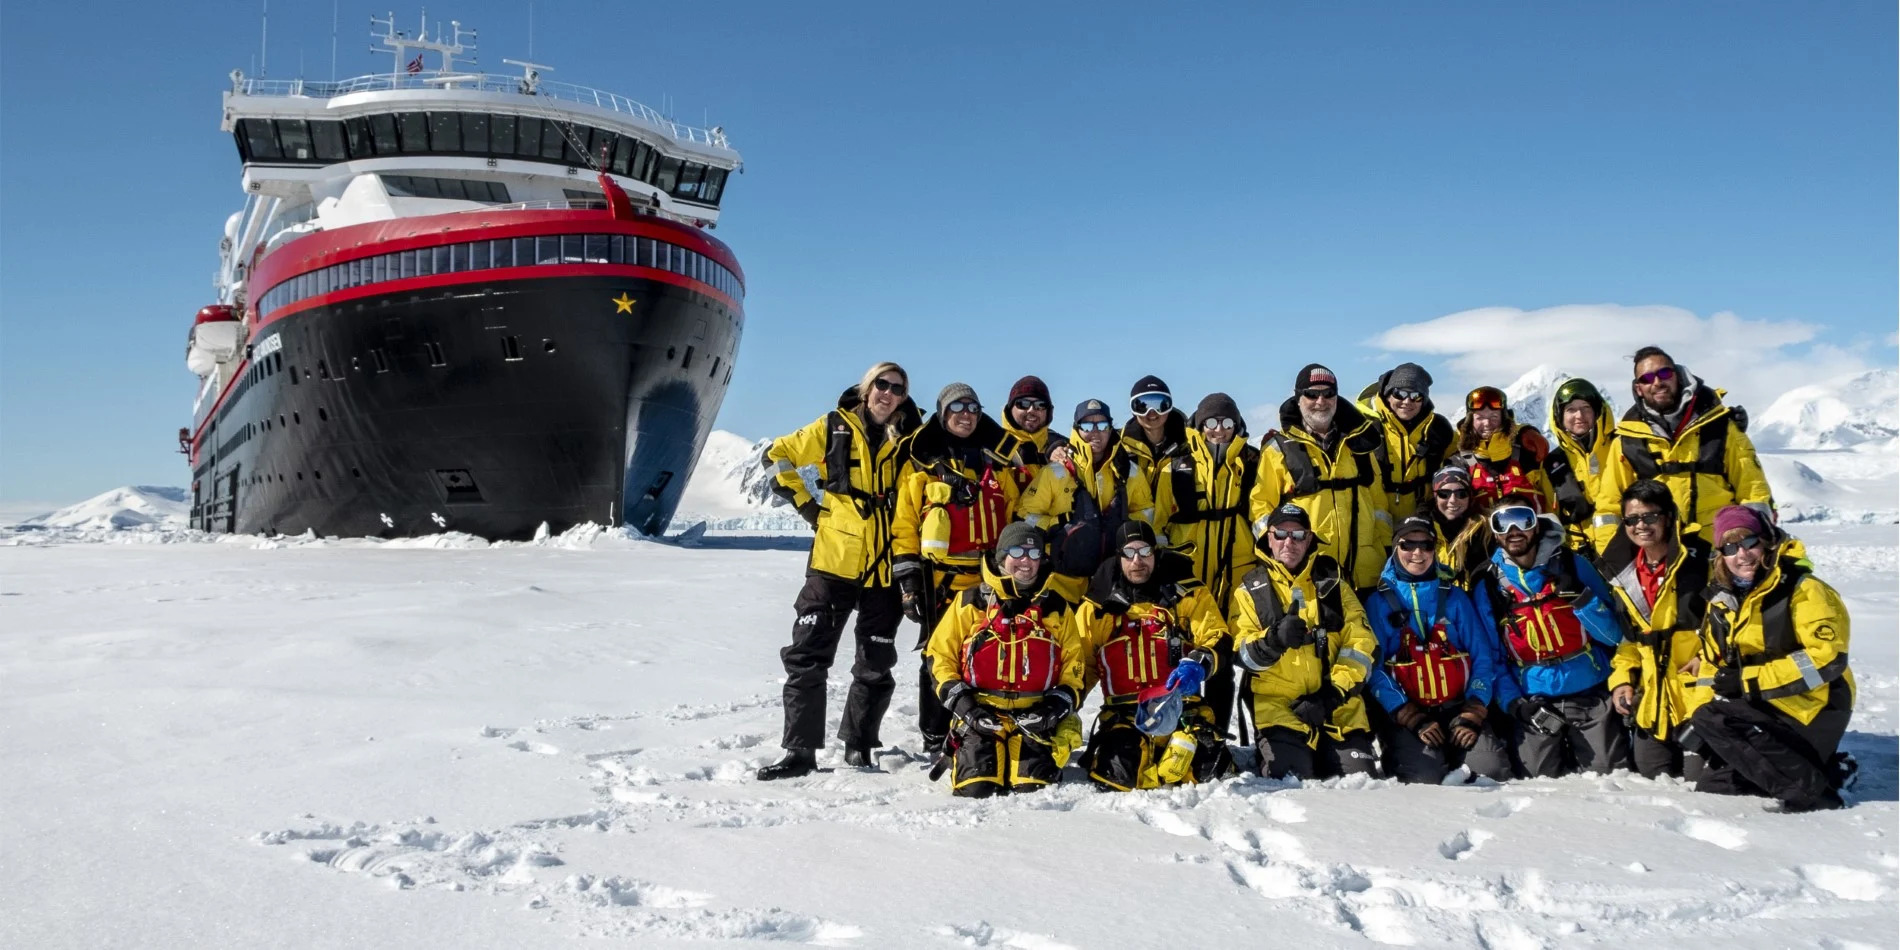 People posing for a photo in front of Hurtigruten ship